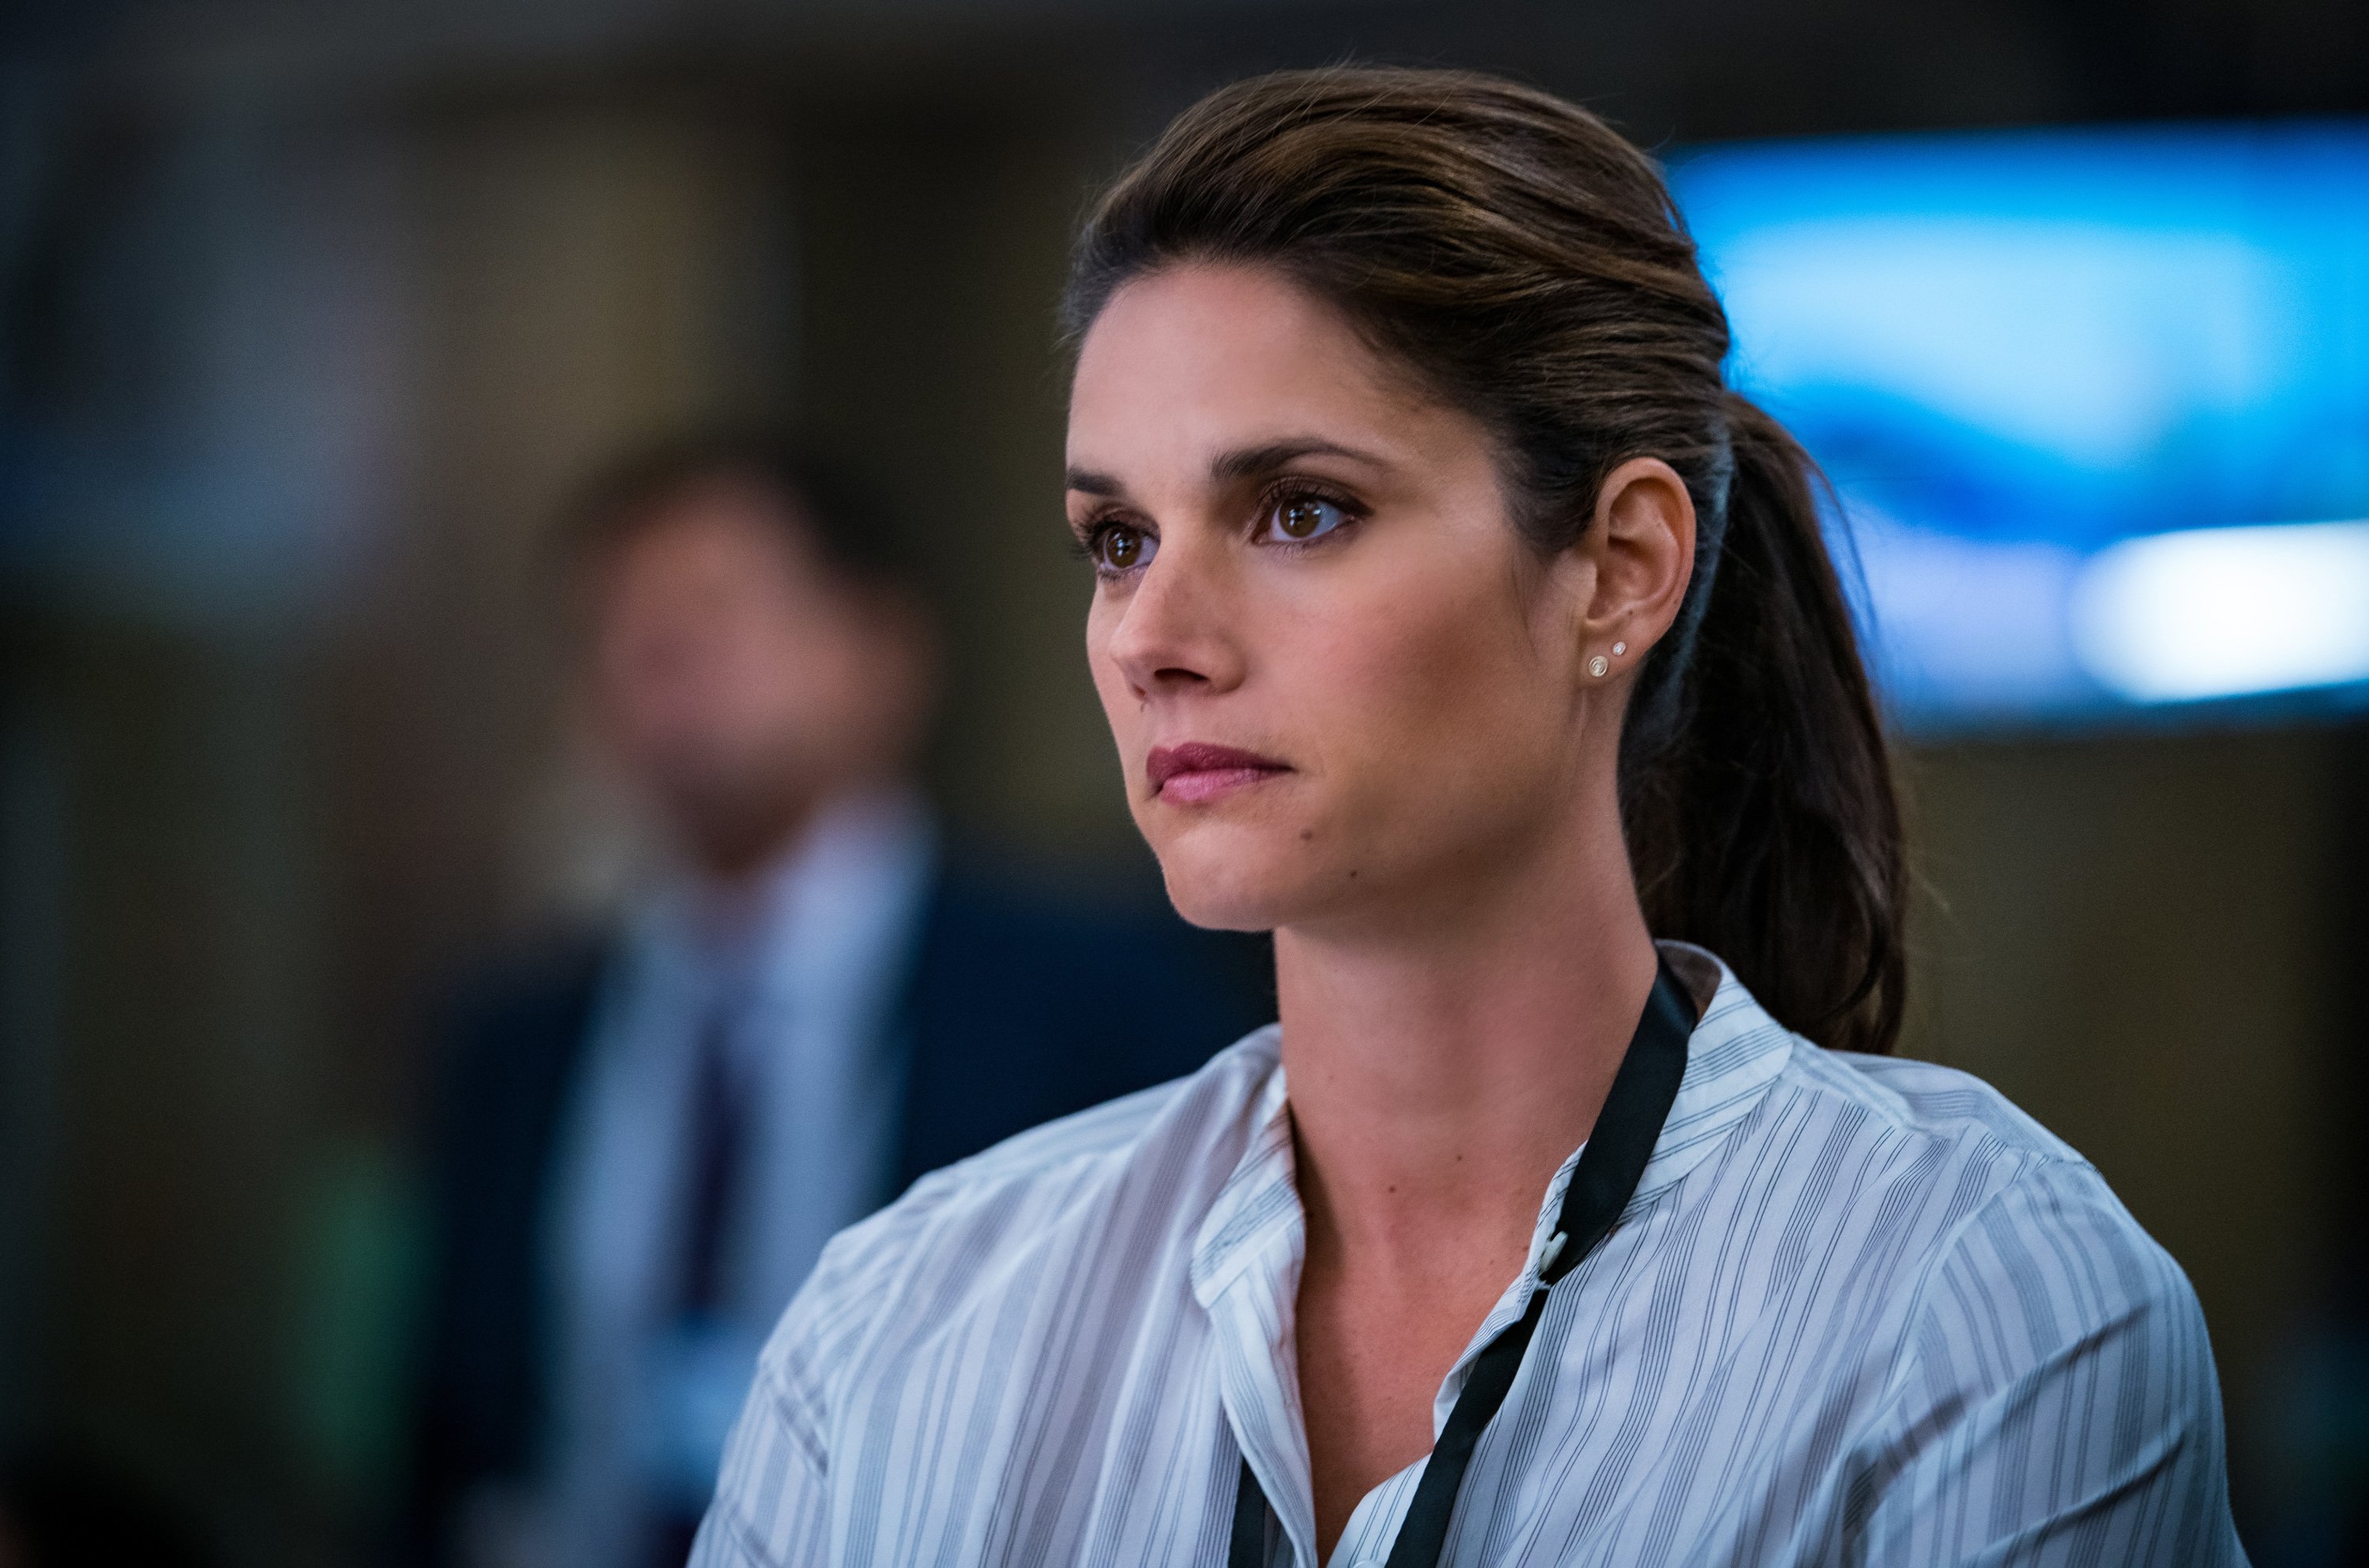 Missy Peregrym as Special Agent Maggie Bell | Mark Schafer/CBS via Getty Images